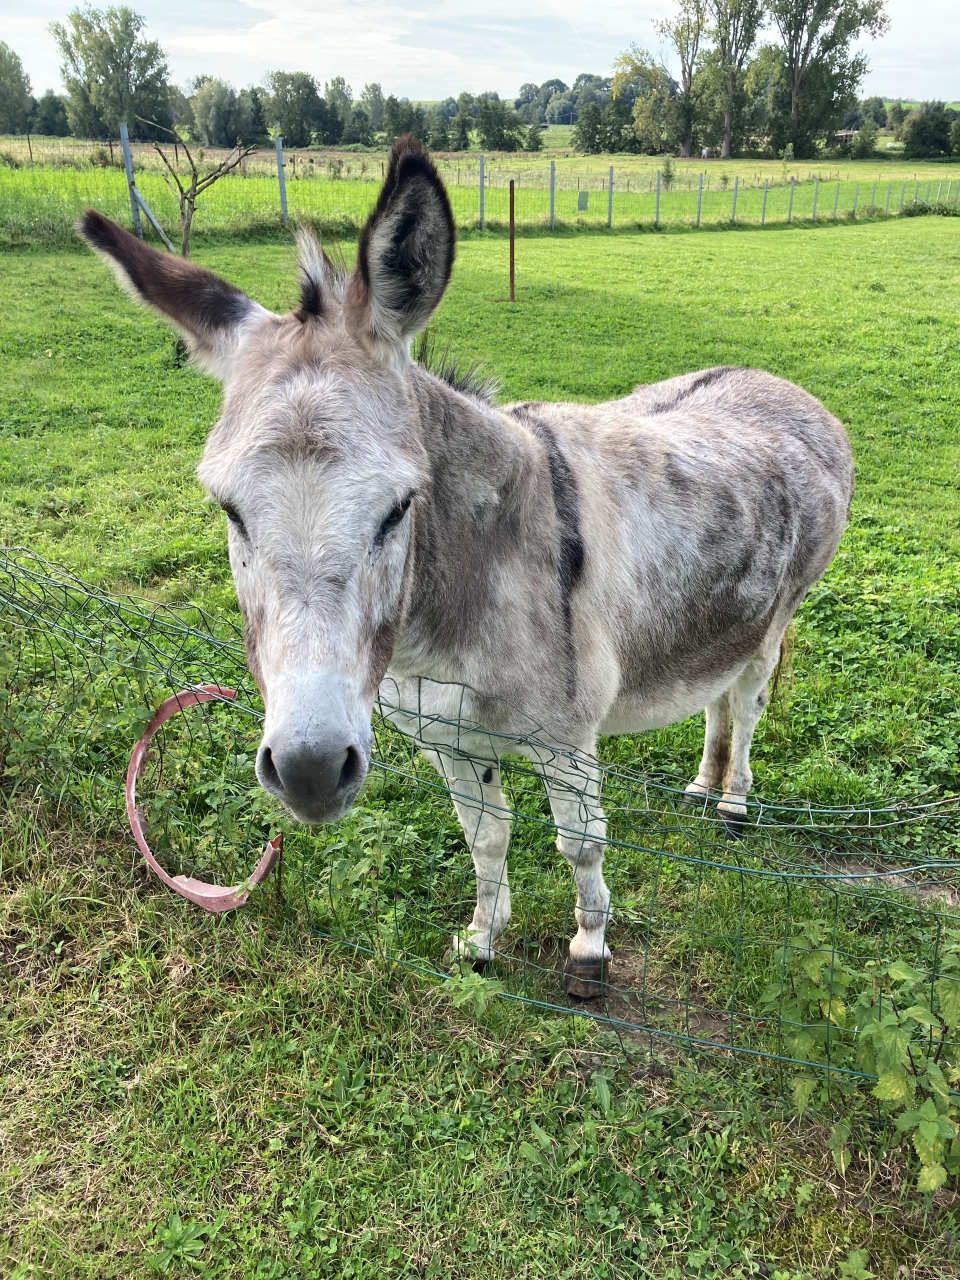 Audio Story 1 – Lily the Lonely Donkey